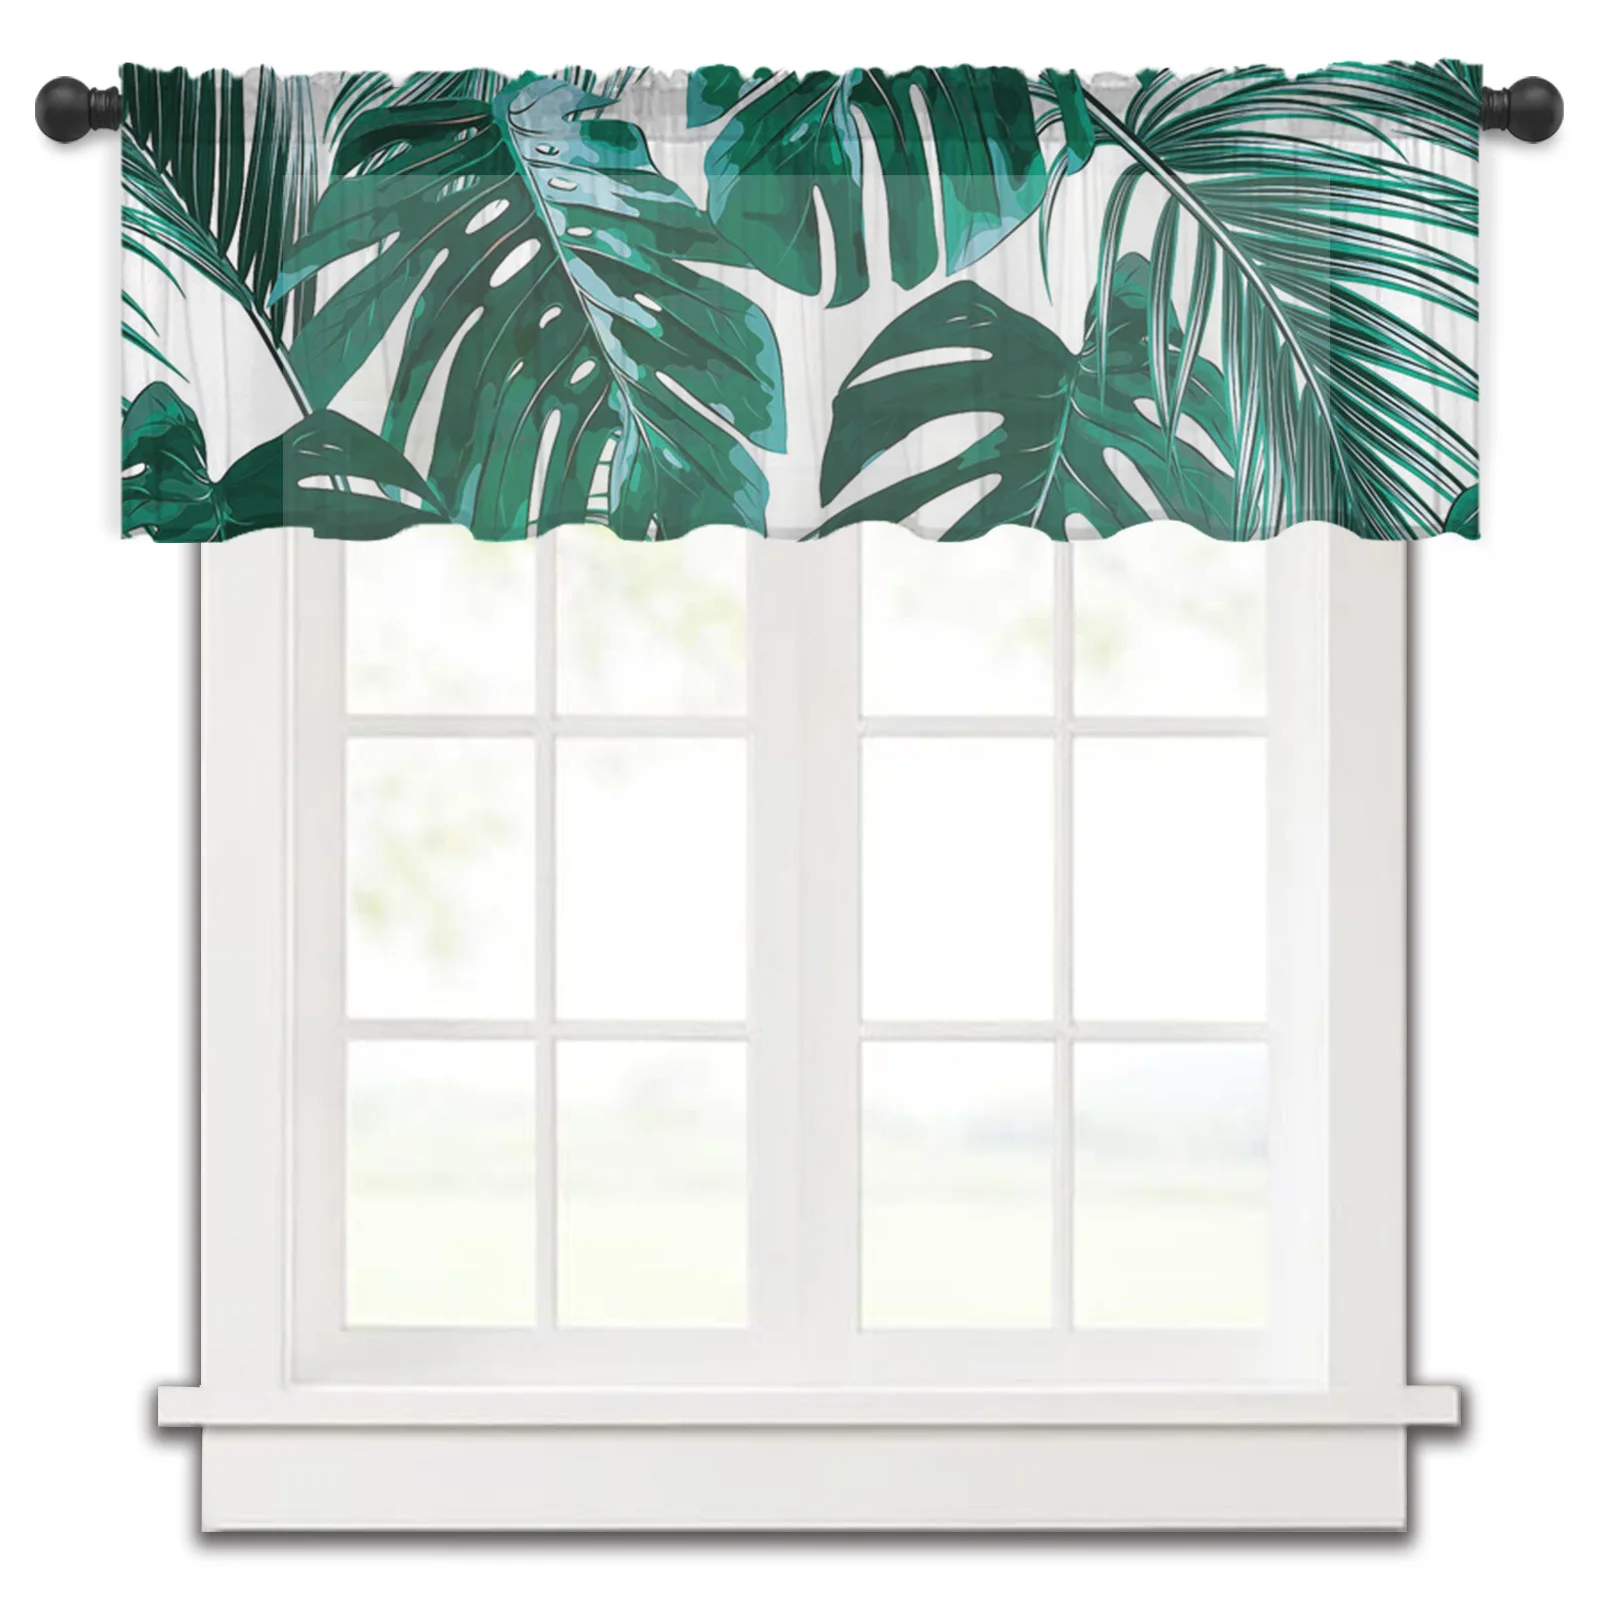 

Palm Leaves Tropical Plant Kitchen Small Window Curtain Tulle Sheer Short Curtain Bedroom Living Room Home Decor Voile Drapes